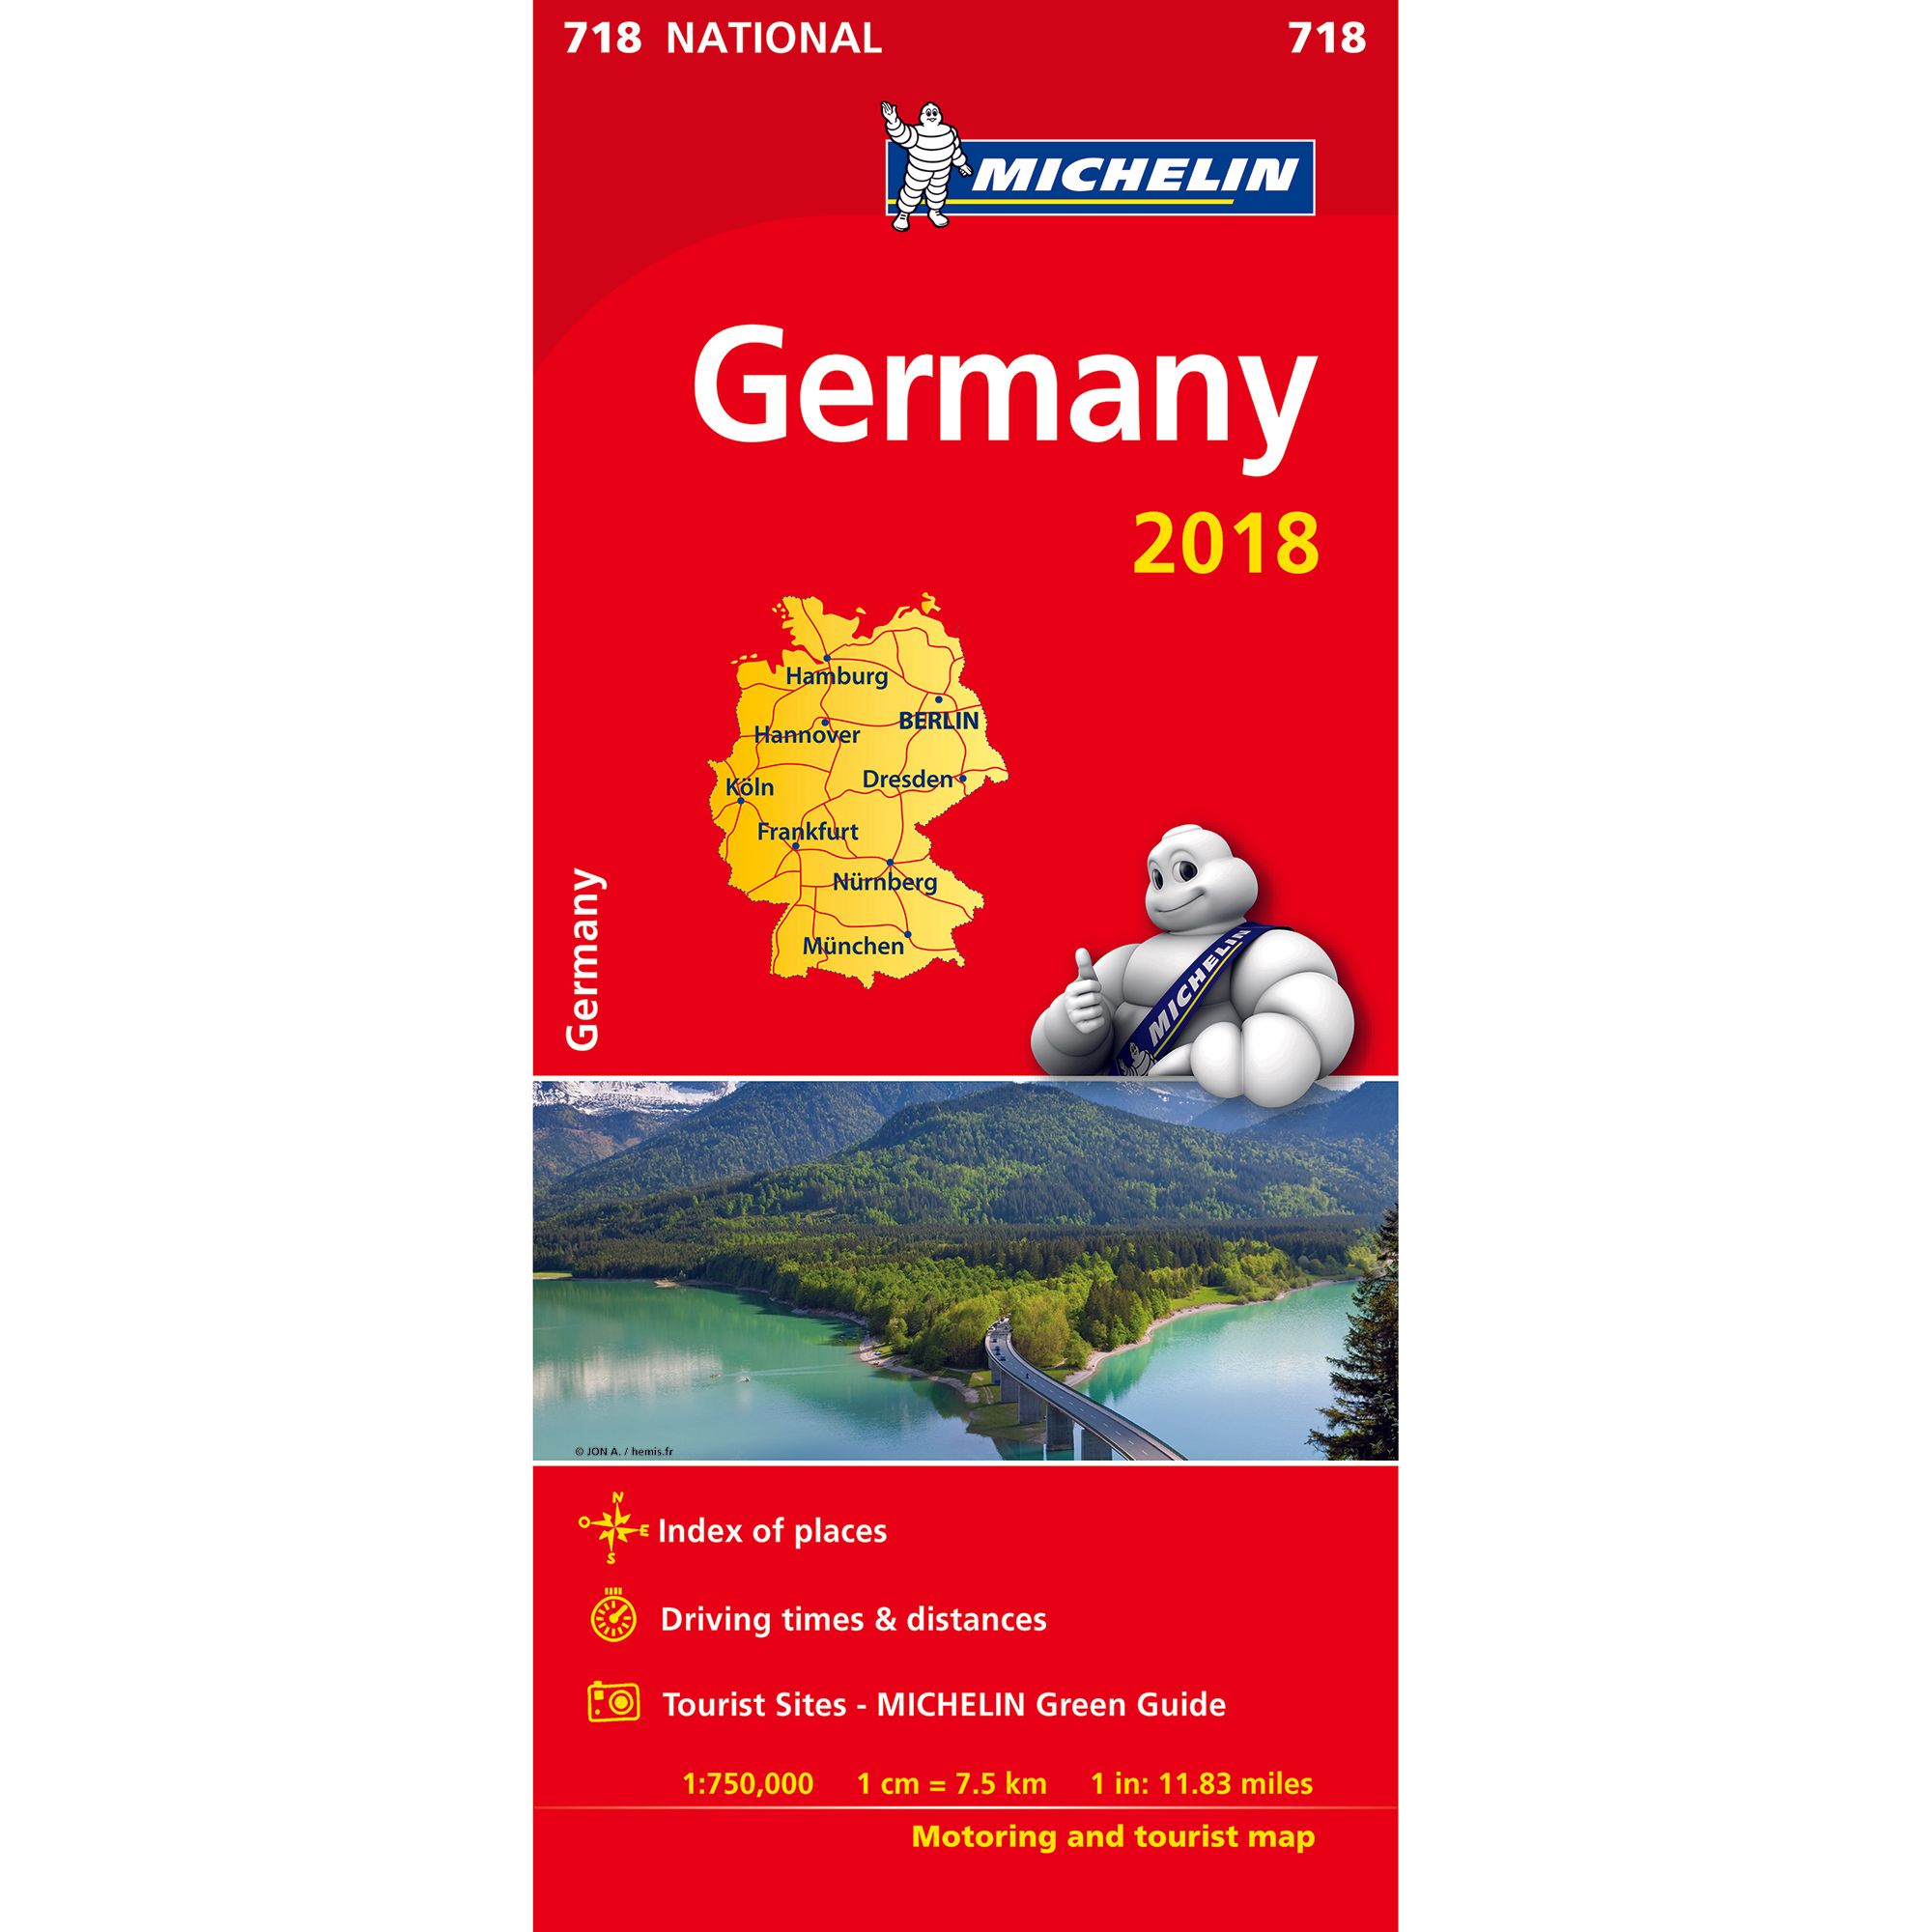 Germany 2018 National Map 718